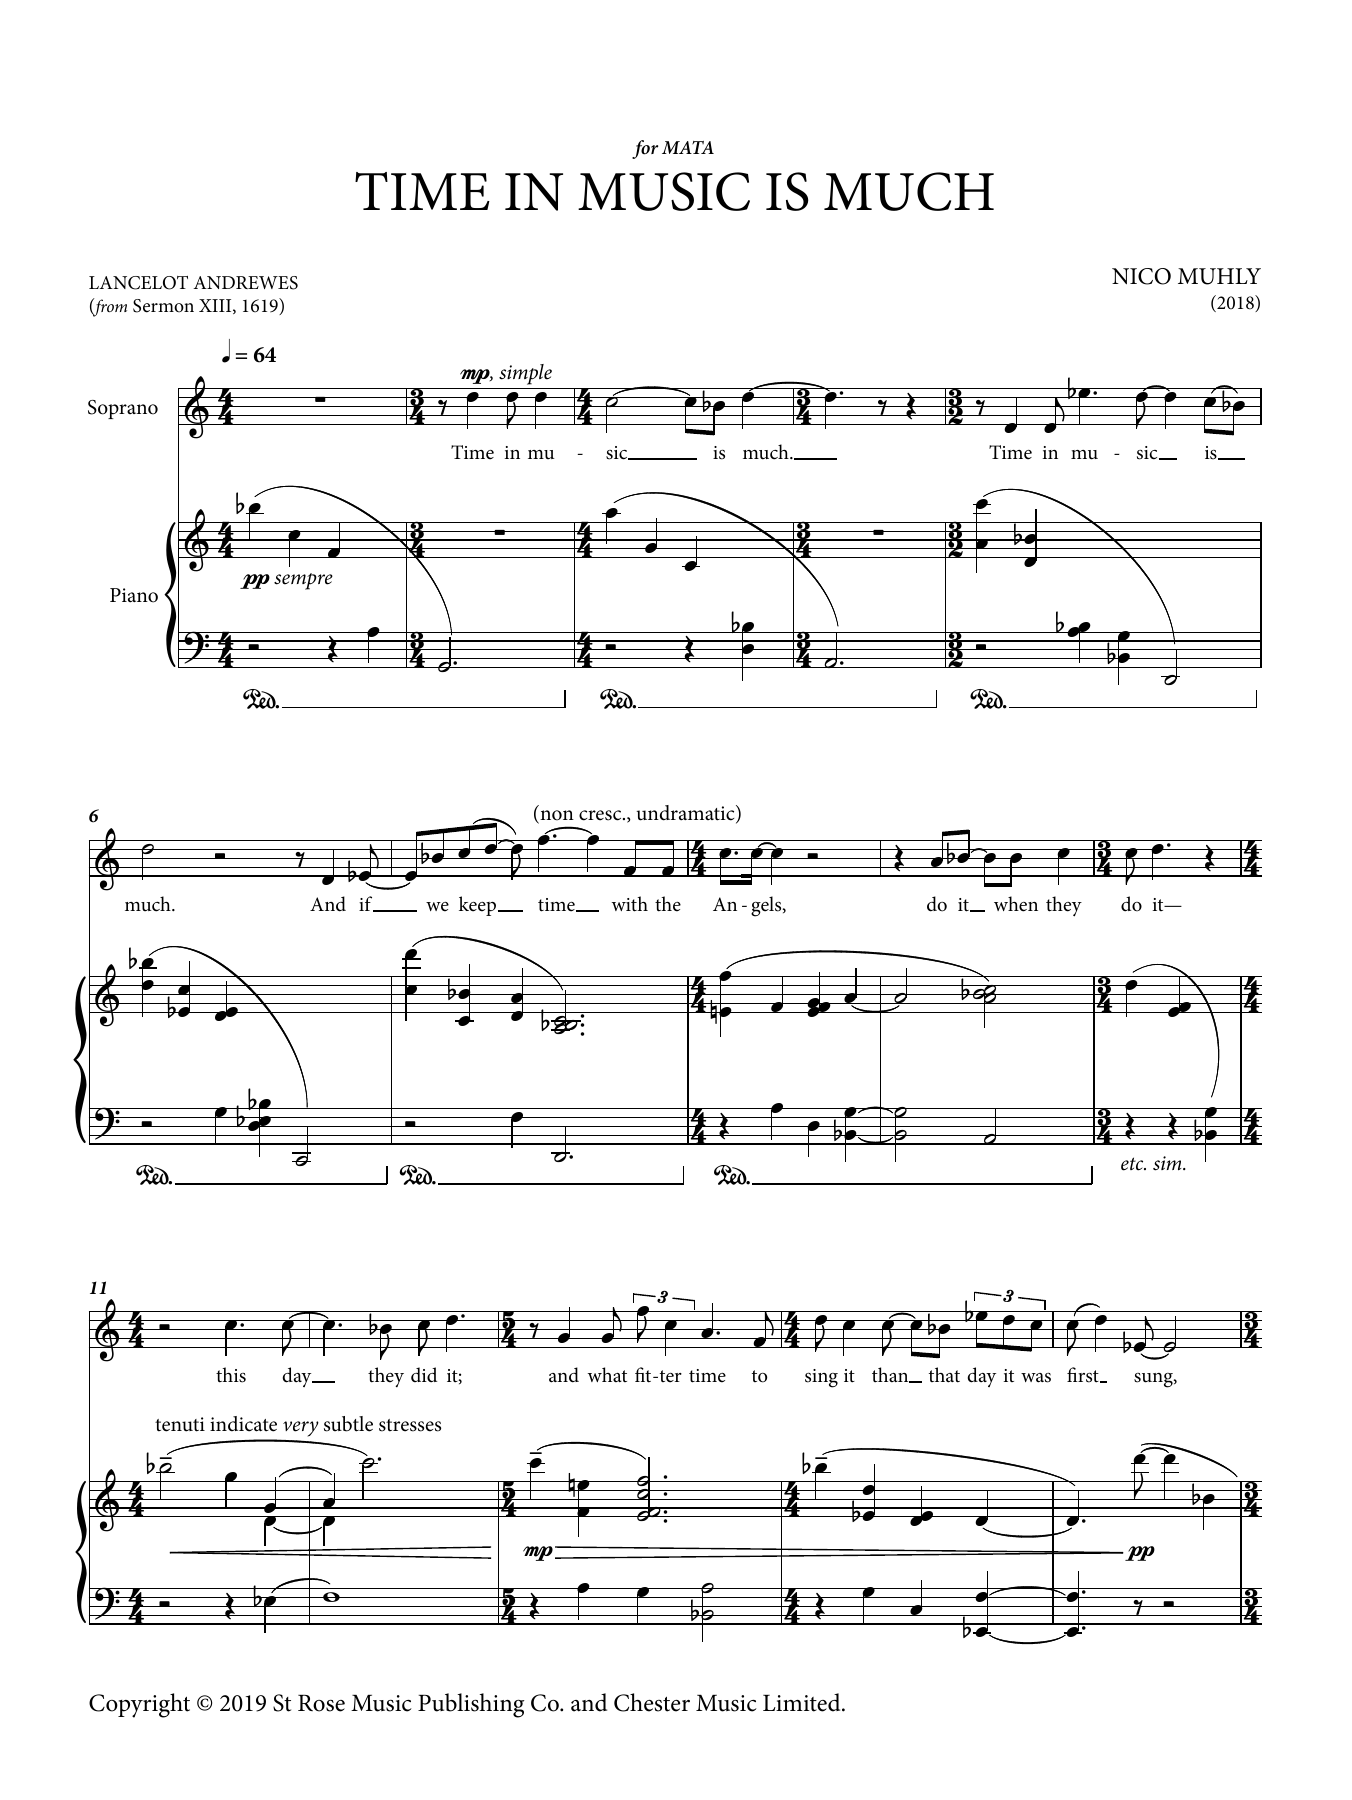 Download Nico Muhly Time In Music Is Much Sheet Music